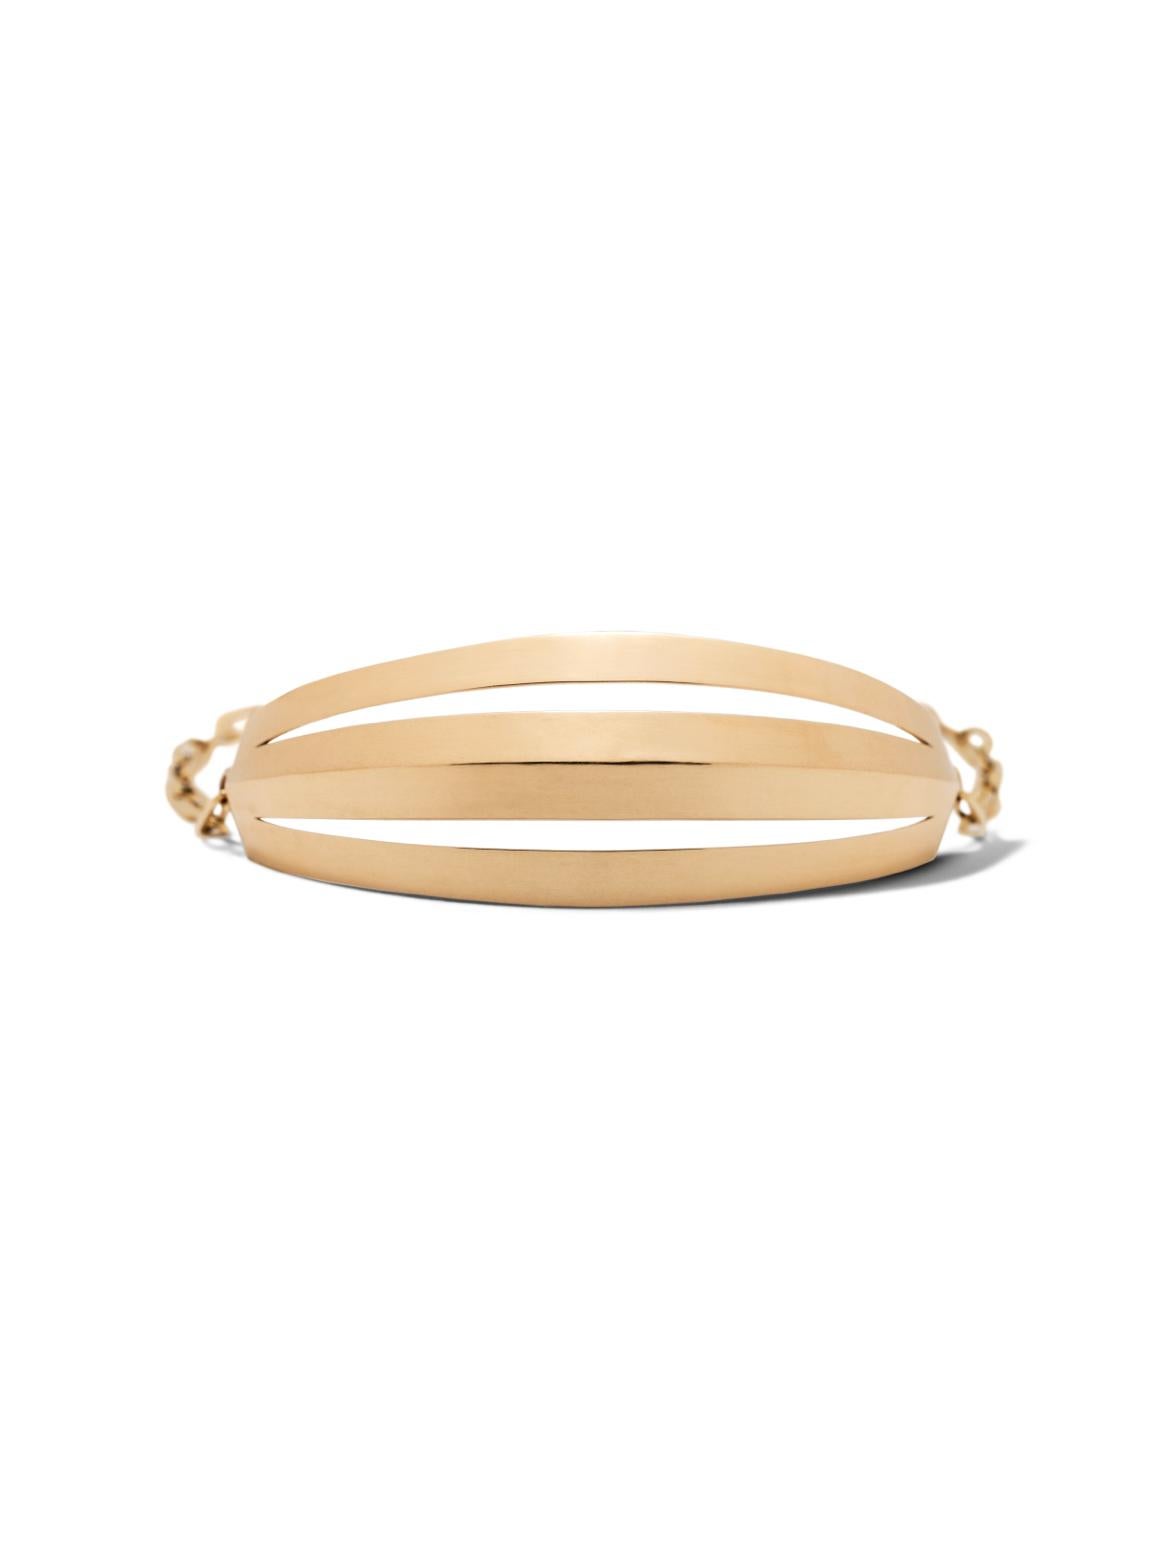 This piece features a substantial, breathable gold bar, linked to a chain and an eye-catching sun charm. With its exceptional design, it makes an ideal accompaniment to any timepiece or our Jazz Fingers hand chain. Don't miss out on this grand,